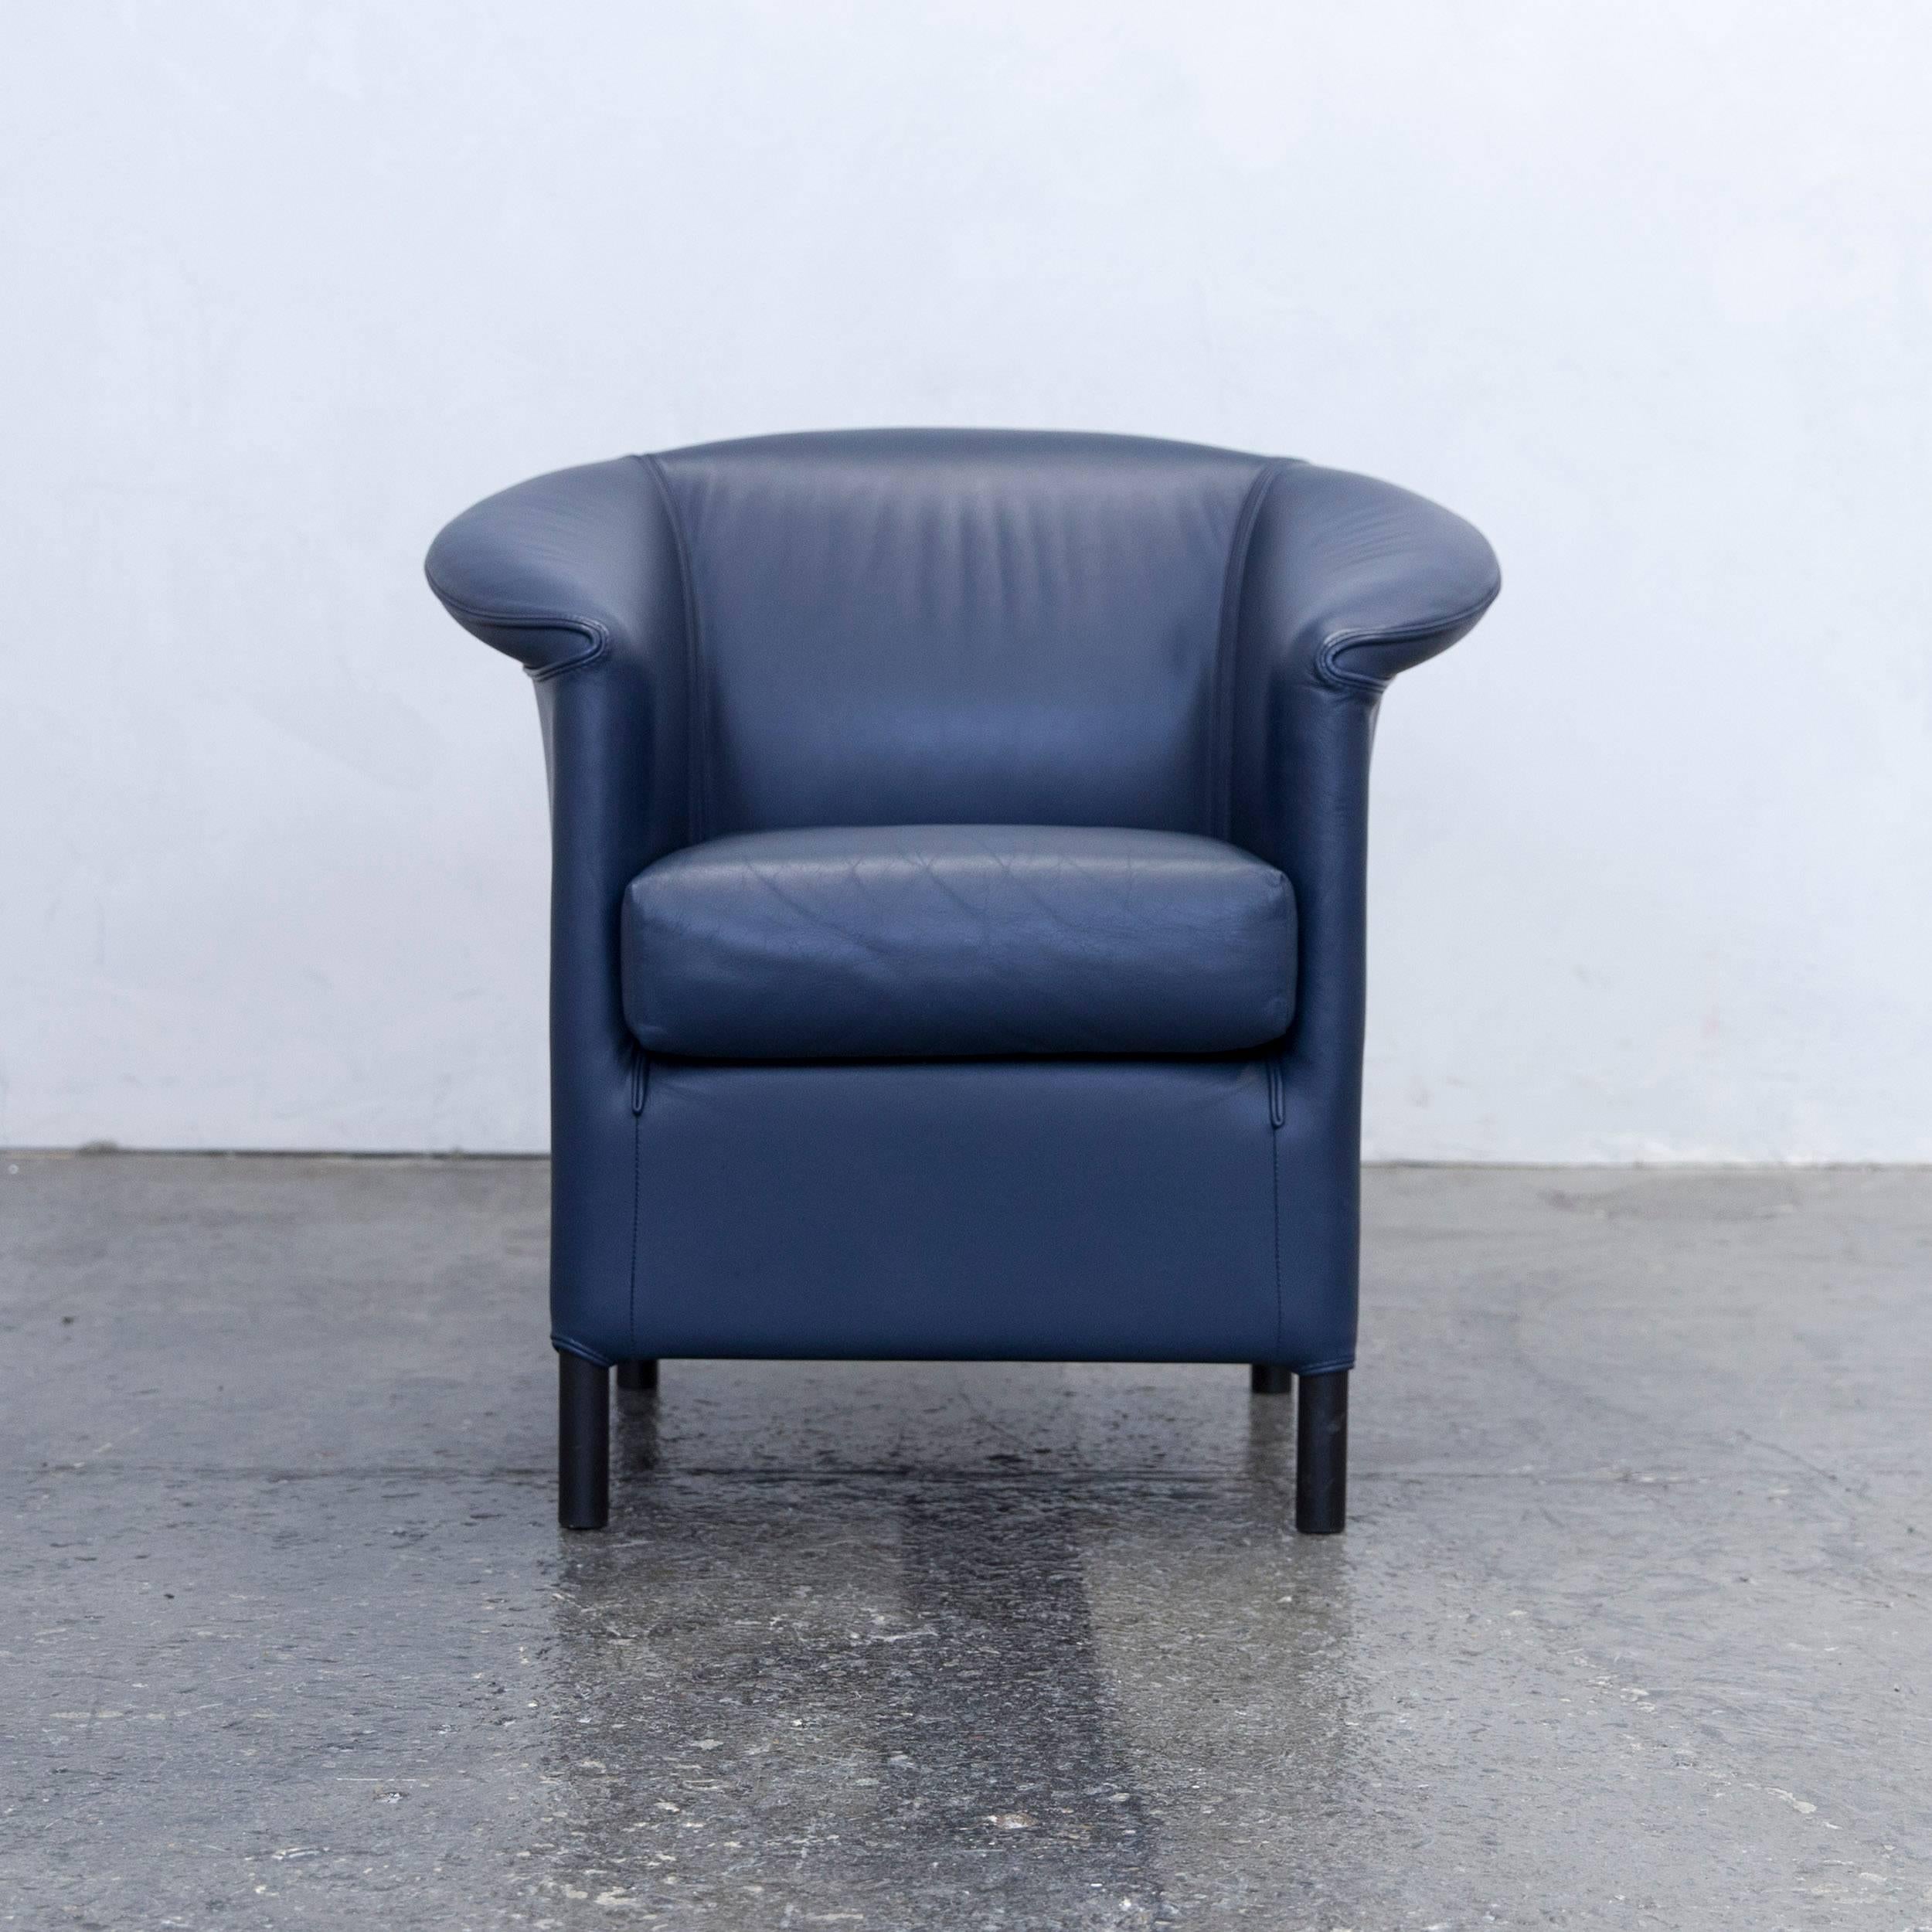 Blue colored original Wittmann Aura designer leather armchair, in a minimalistic and modern design, made for pure comfort.